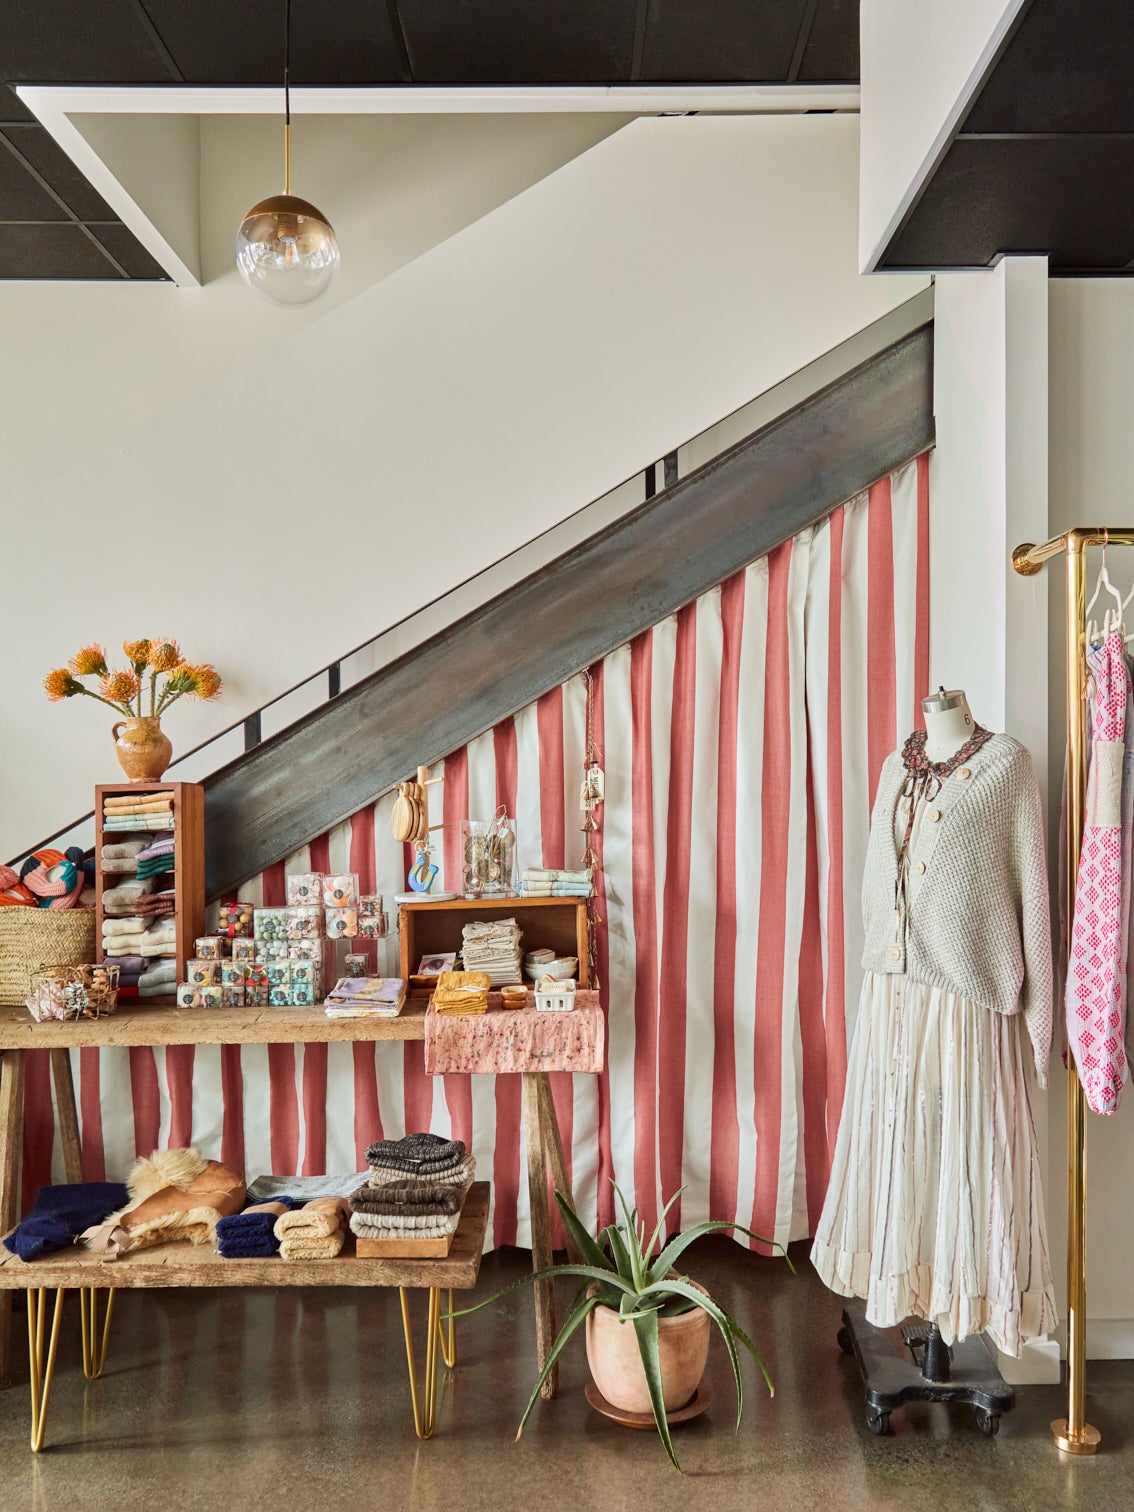 Sacrificing Square Footage for a Pink Onyx Island Paid Off in This New Jersey Shop